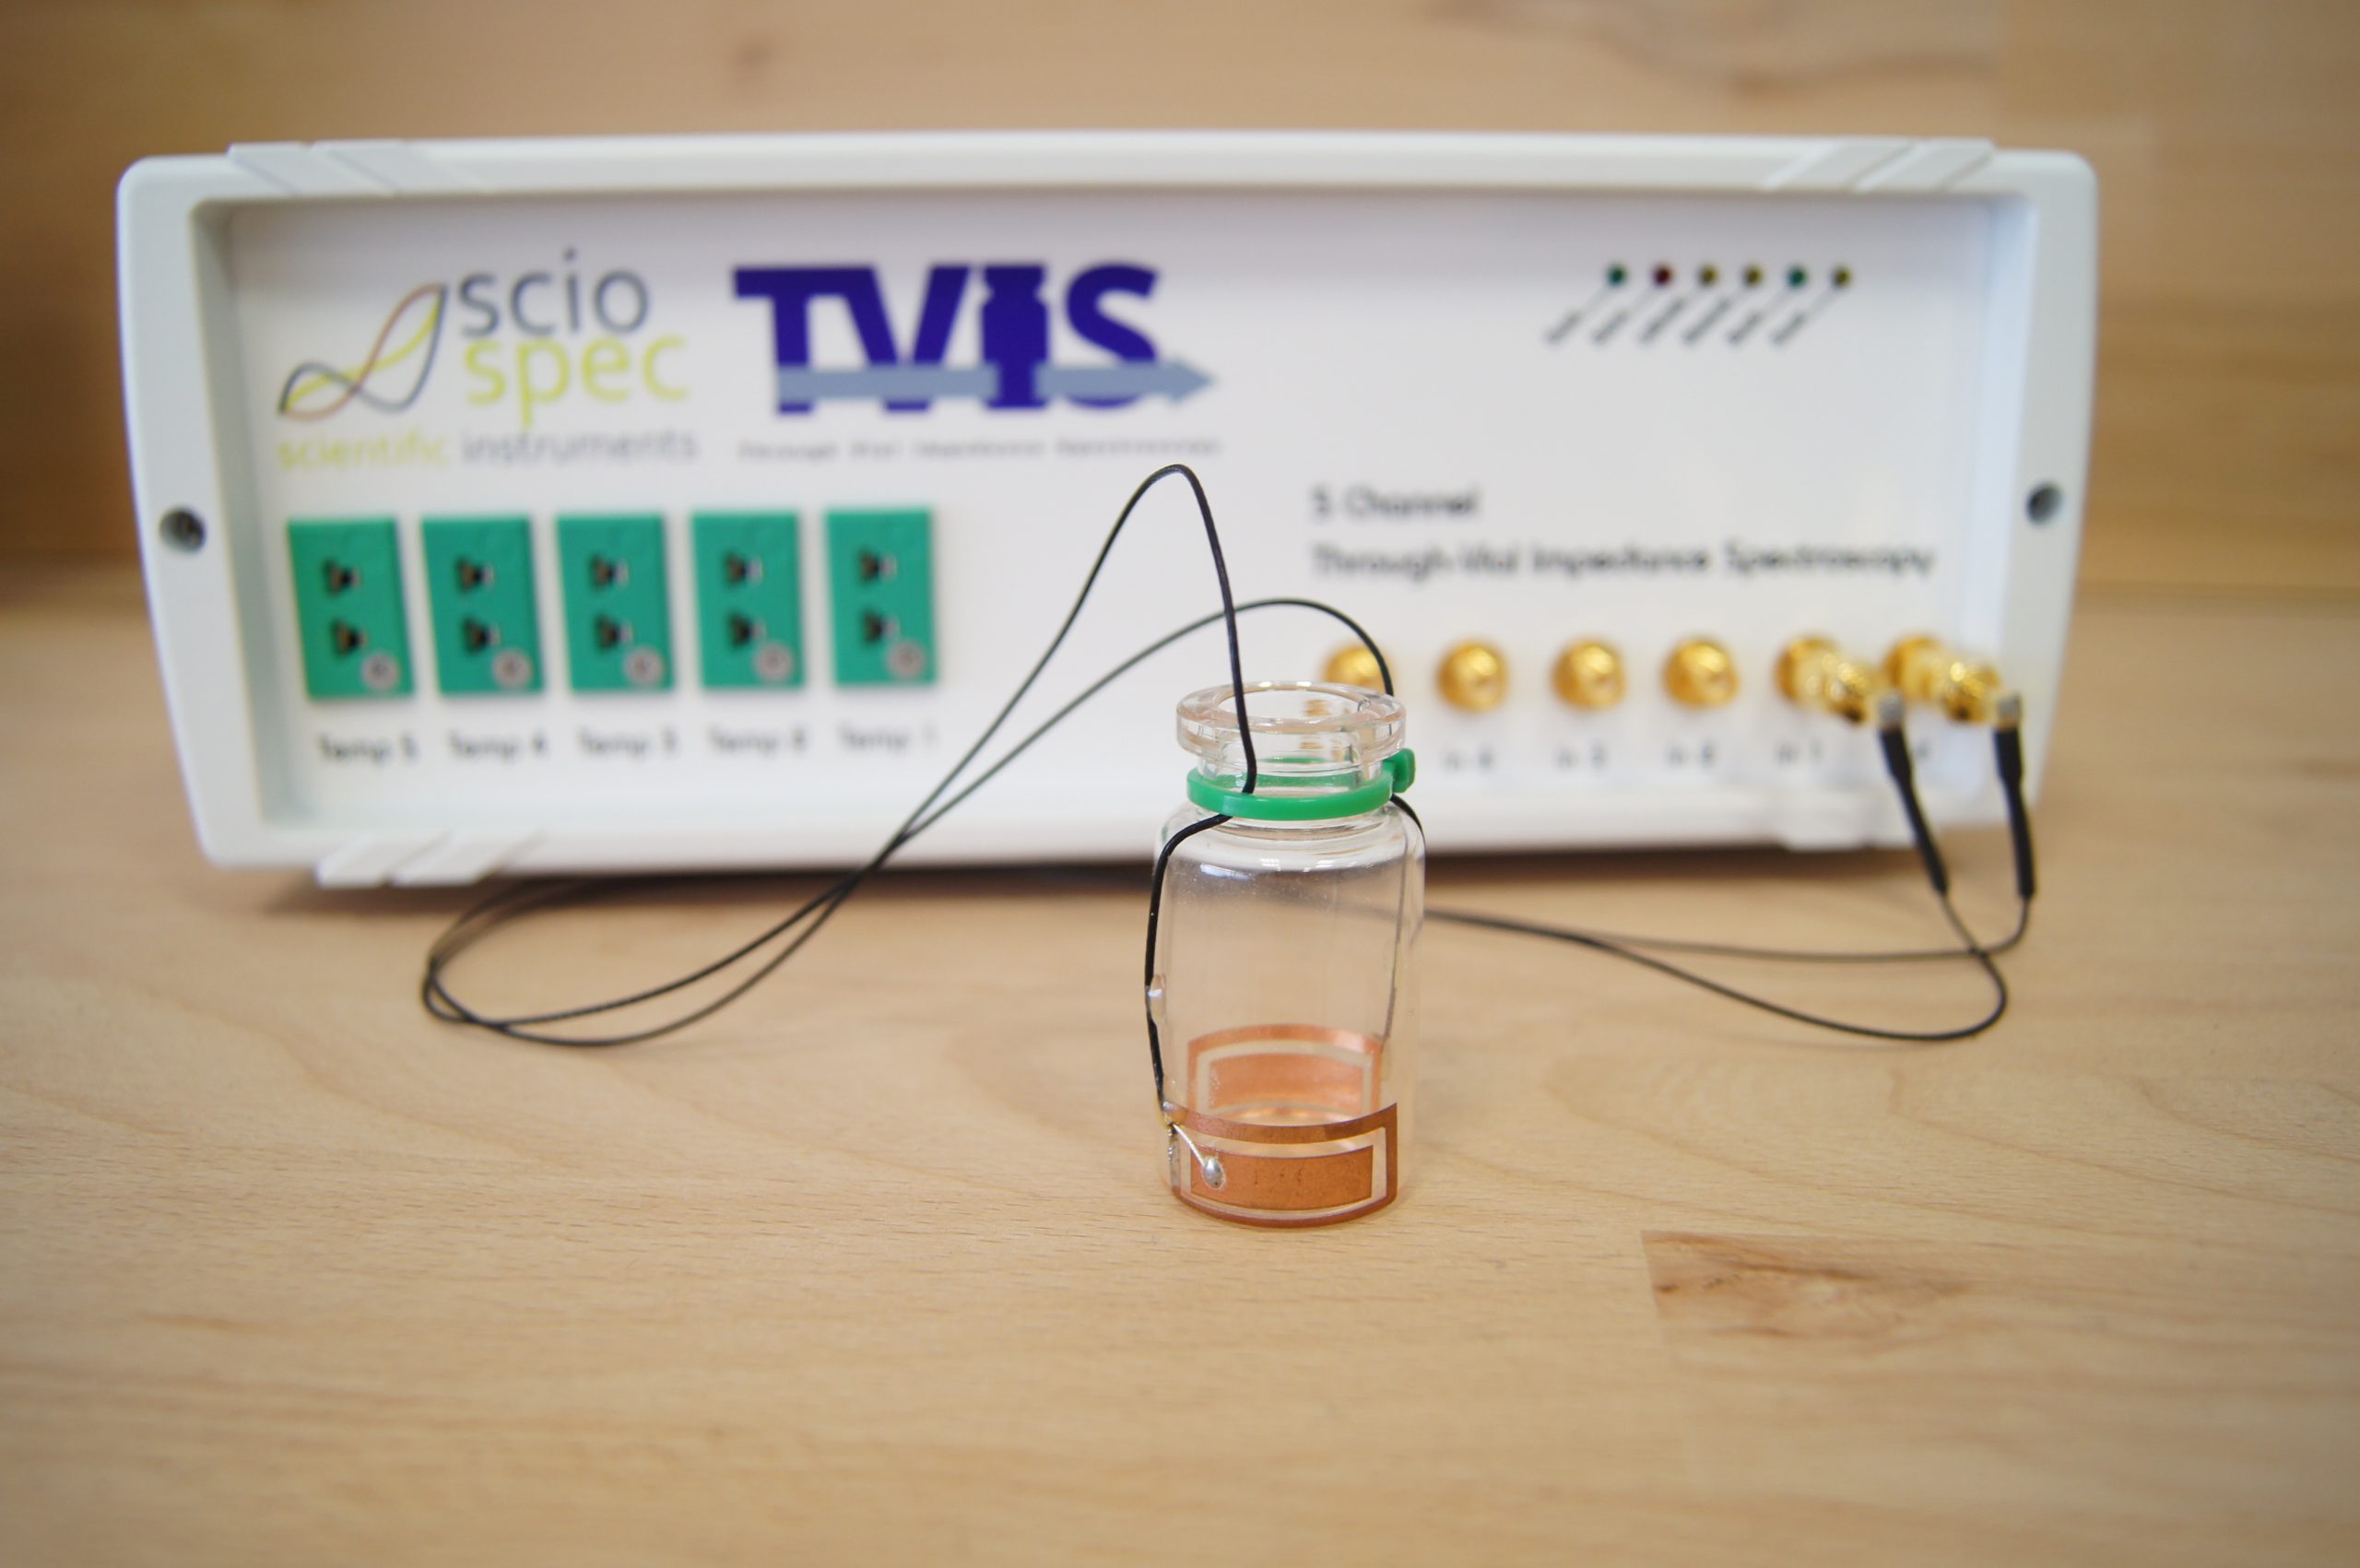 TVIS: application-specific impedance analyzer for freeze drying monitoring